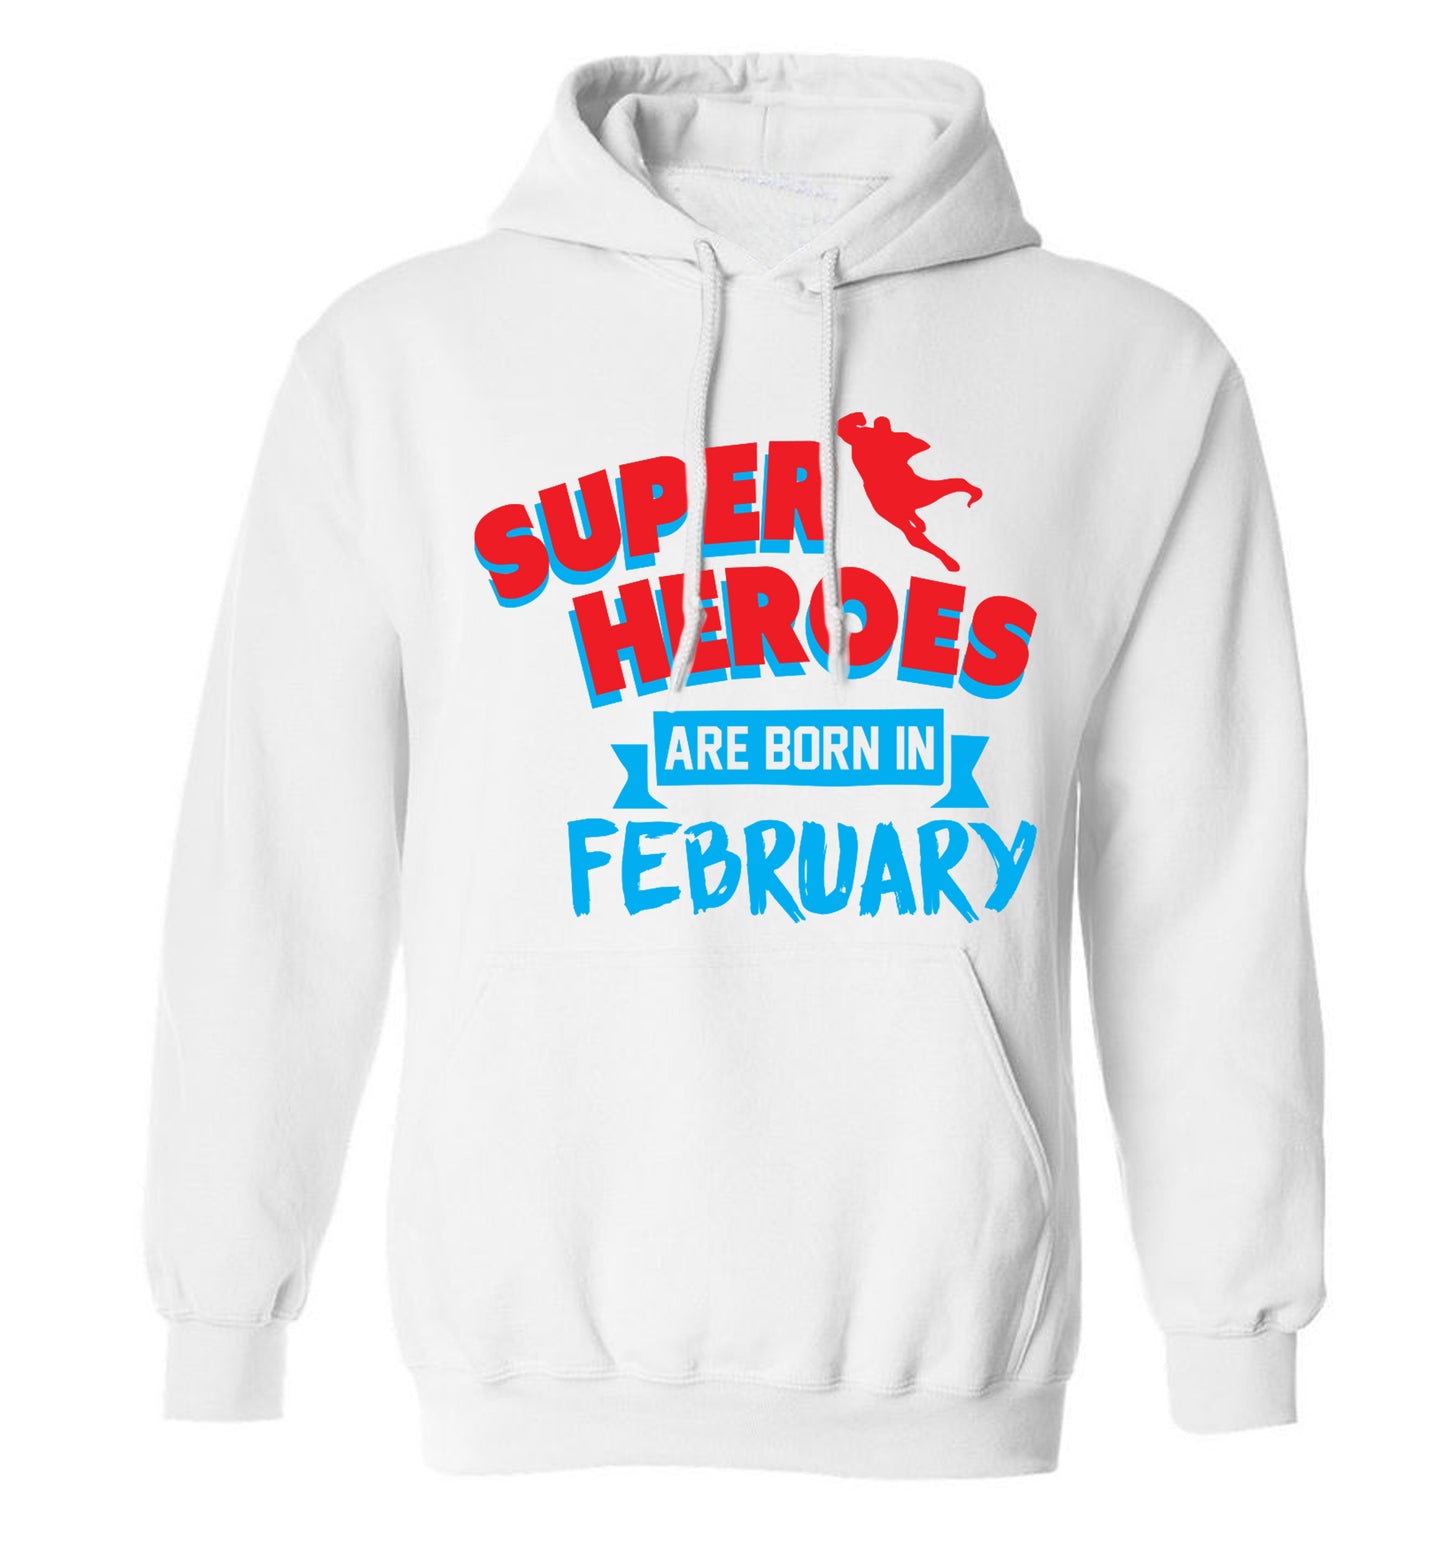 superheroes are born in February adults unisex white hoodie 2XL